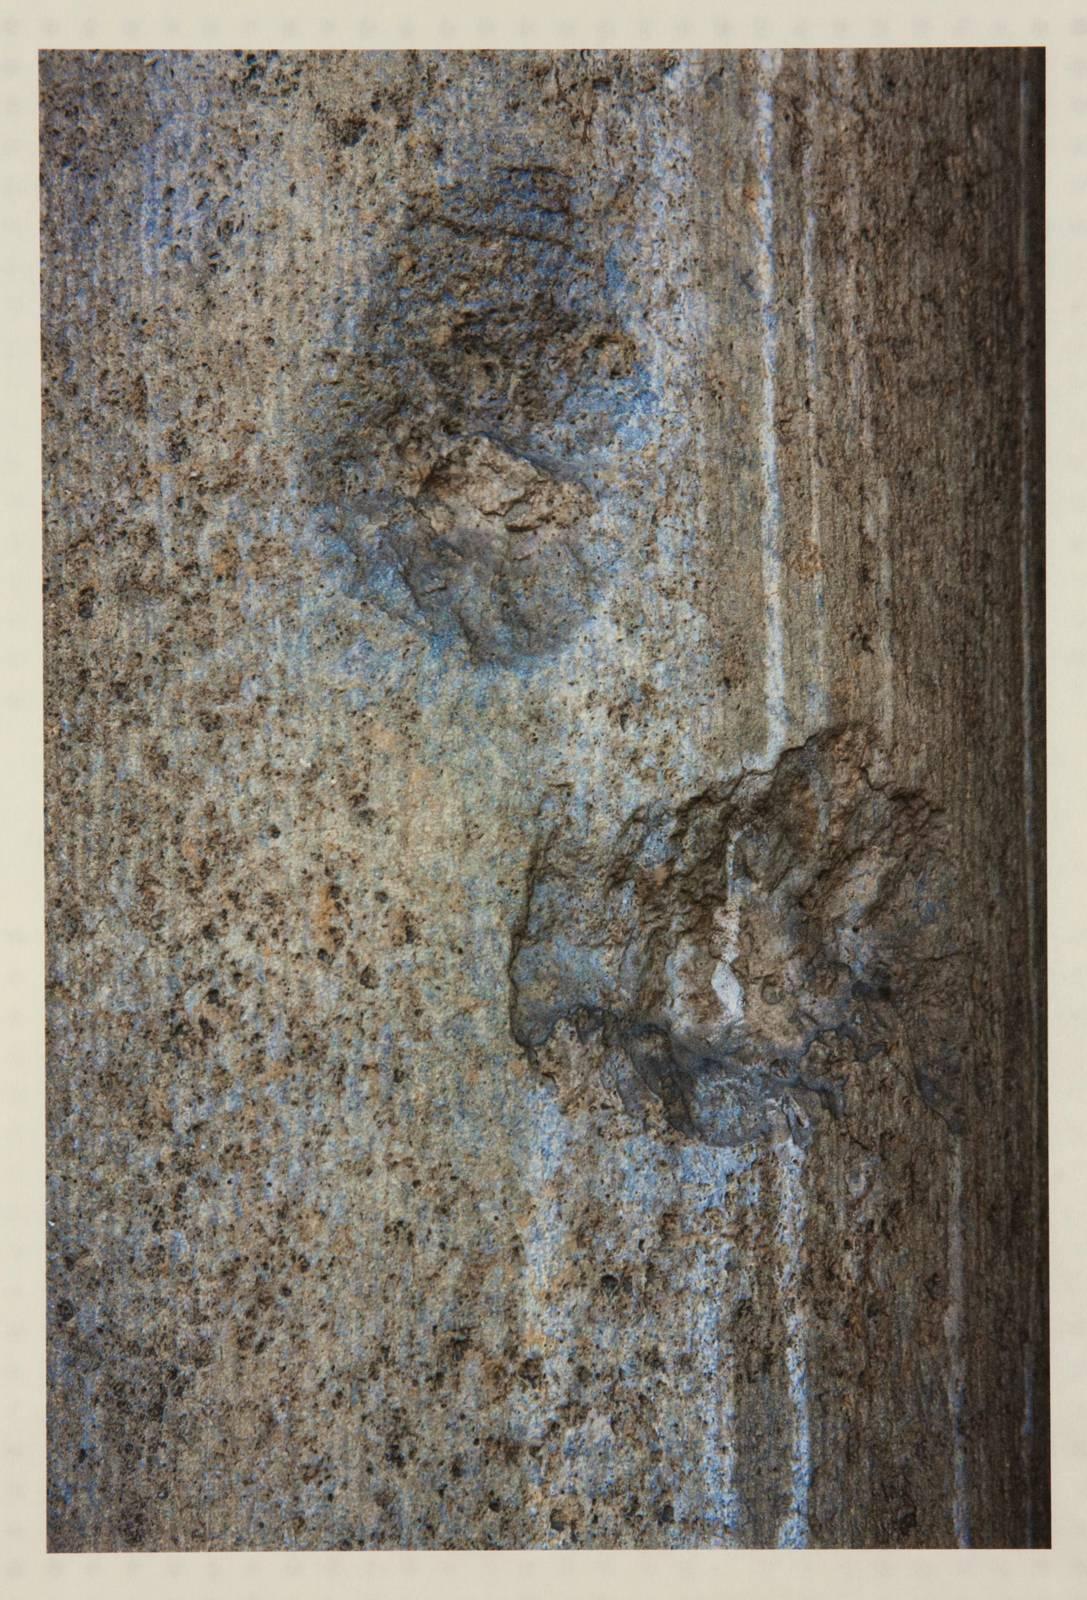 Tamara Rafkin Abstract Photograph - Scars Halensee 967, Archival ink print on kozo (mulberry) paper